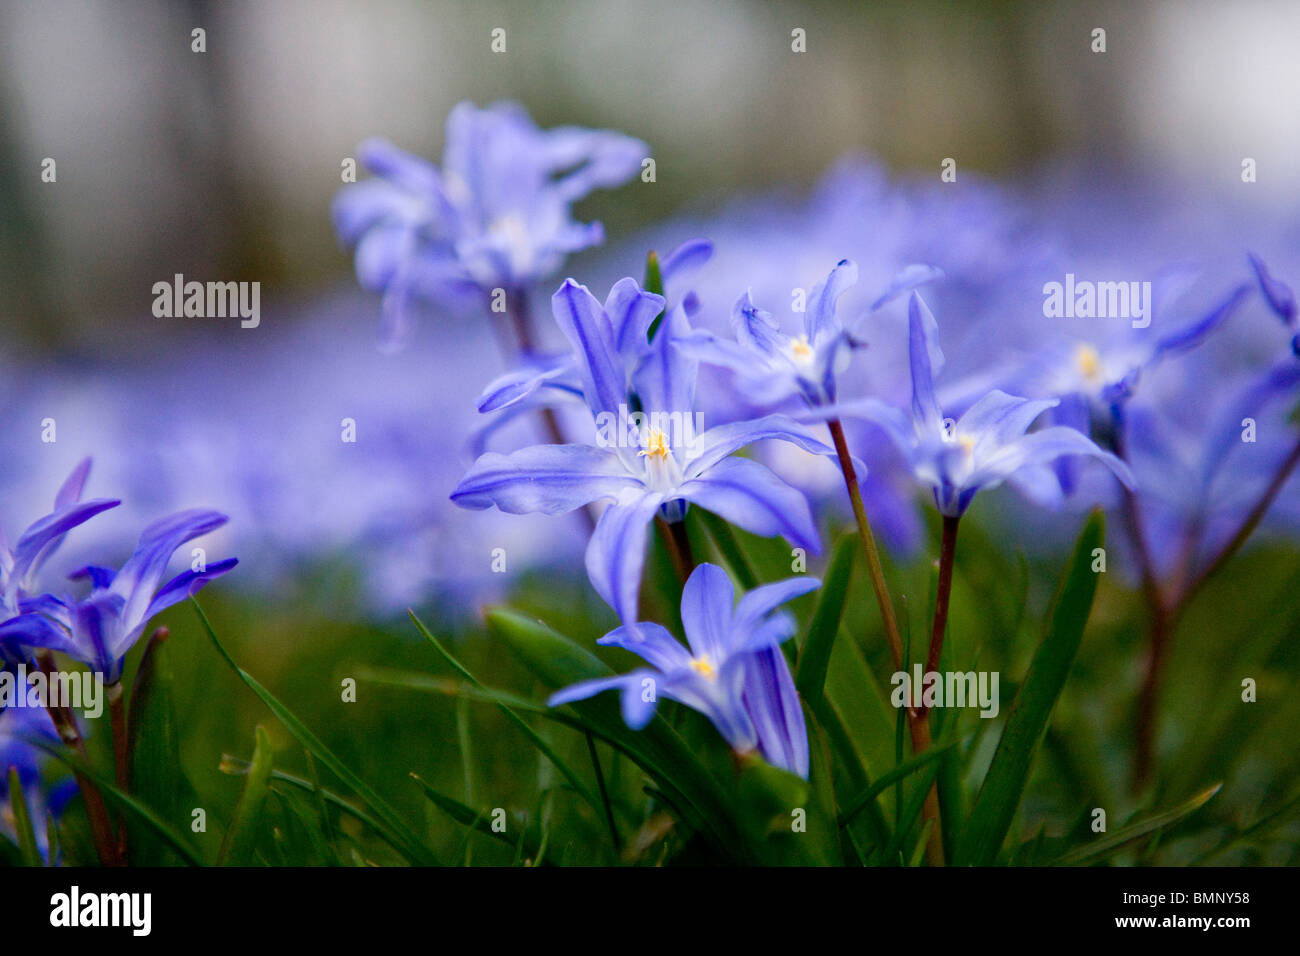 Purple squill flowers in spring Stock Photo